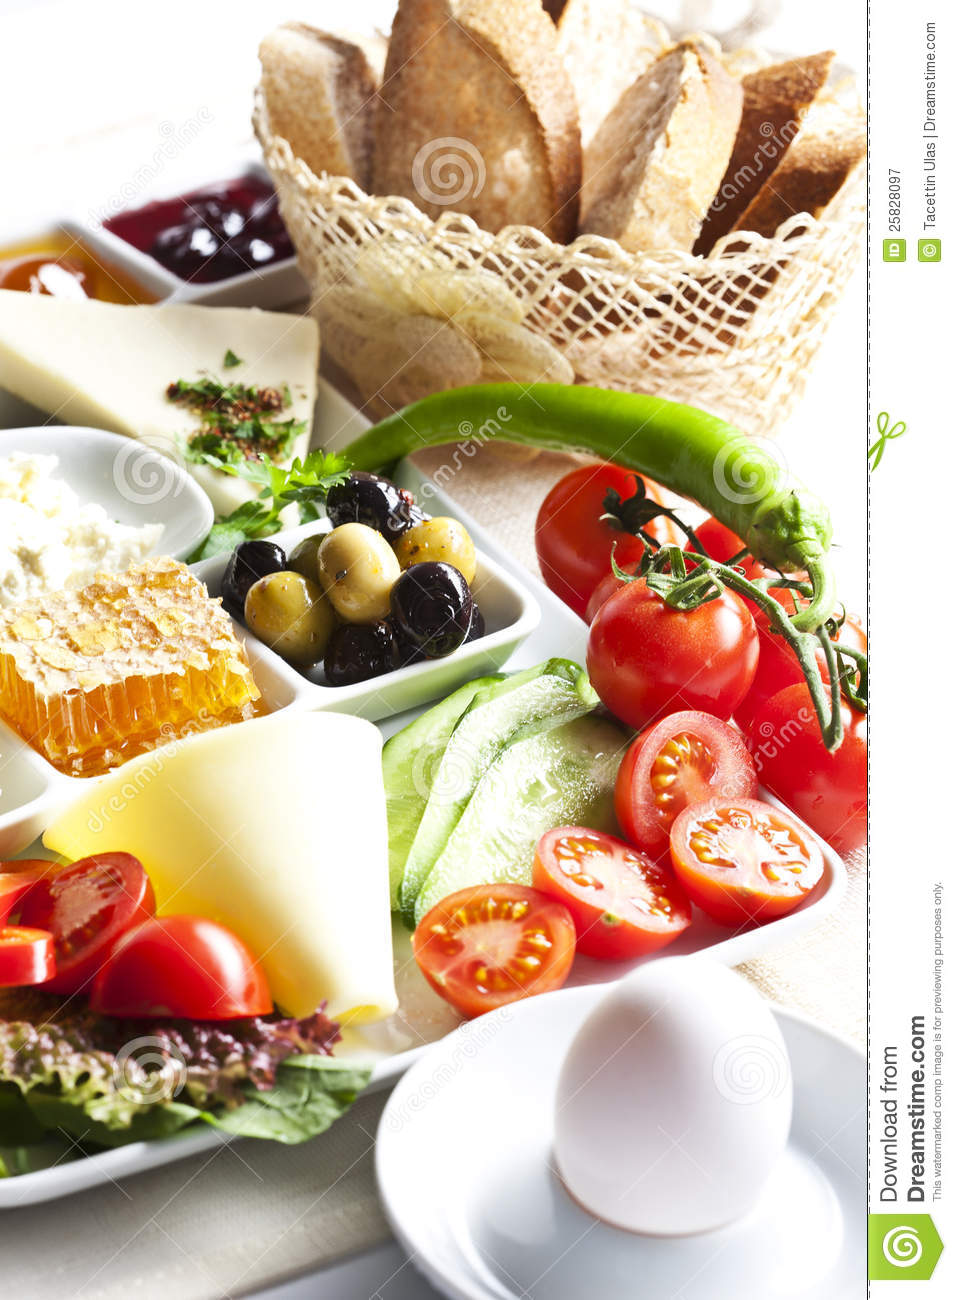 Breakfast Plate Royalty Free Stock Photography   Image  25828097